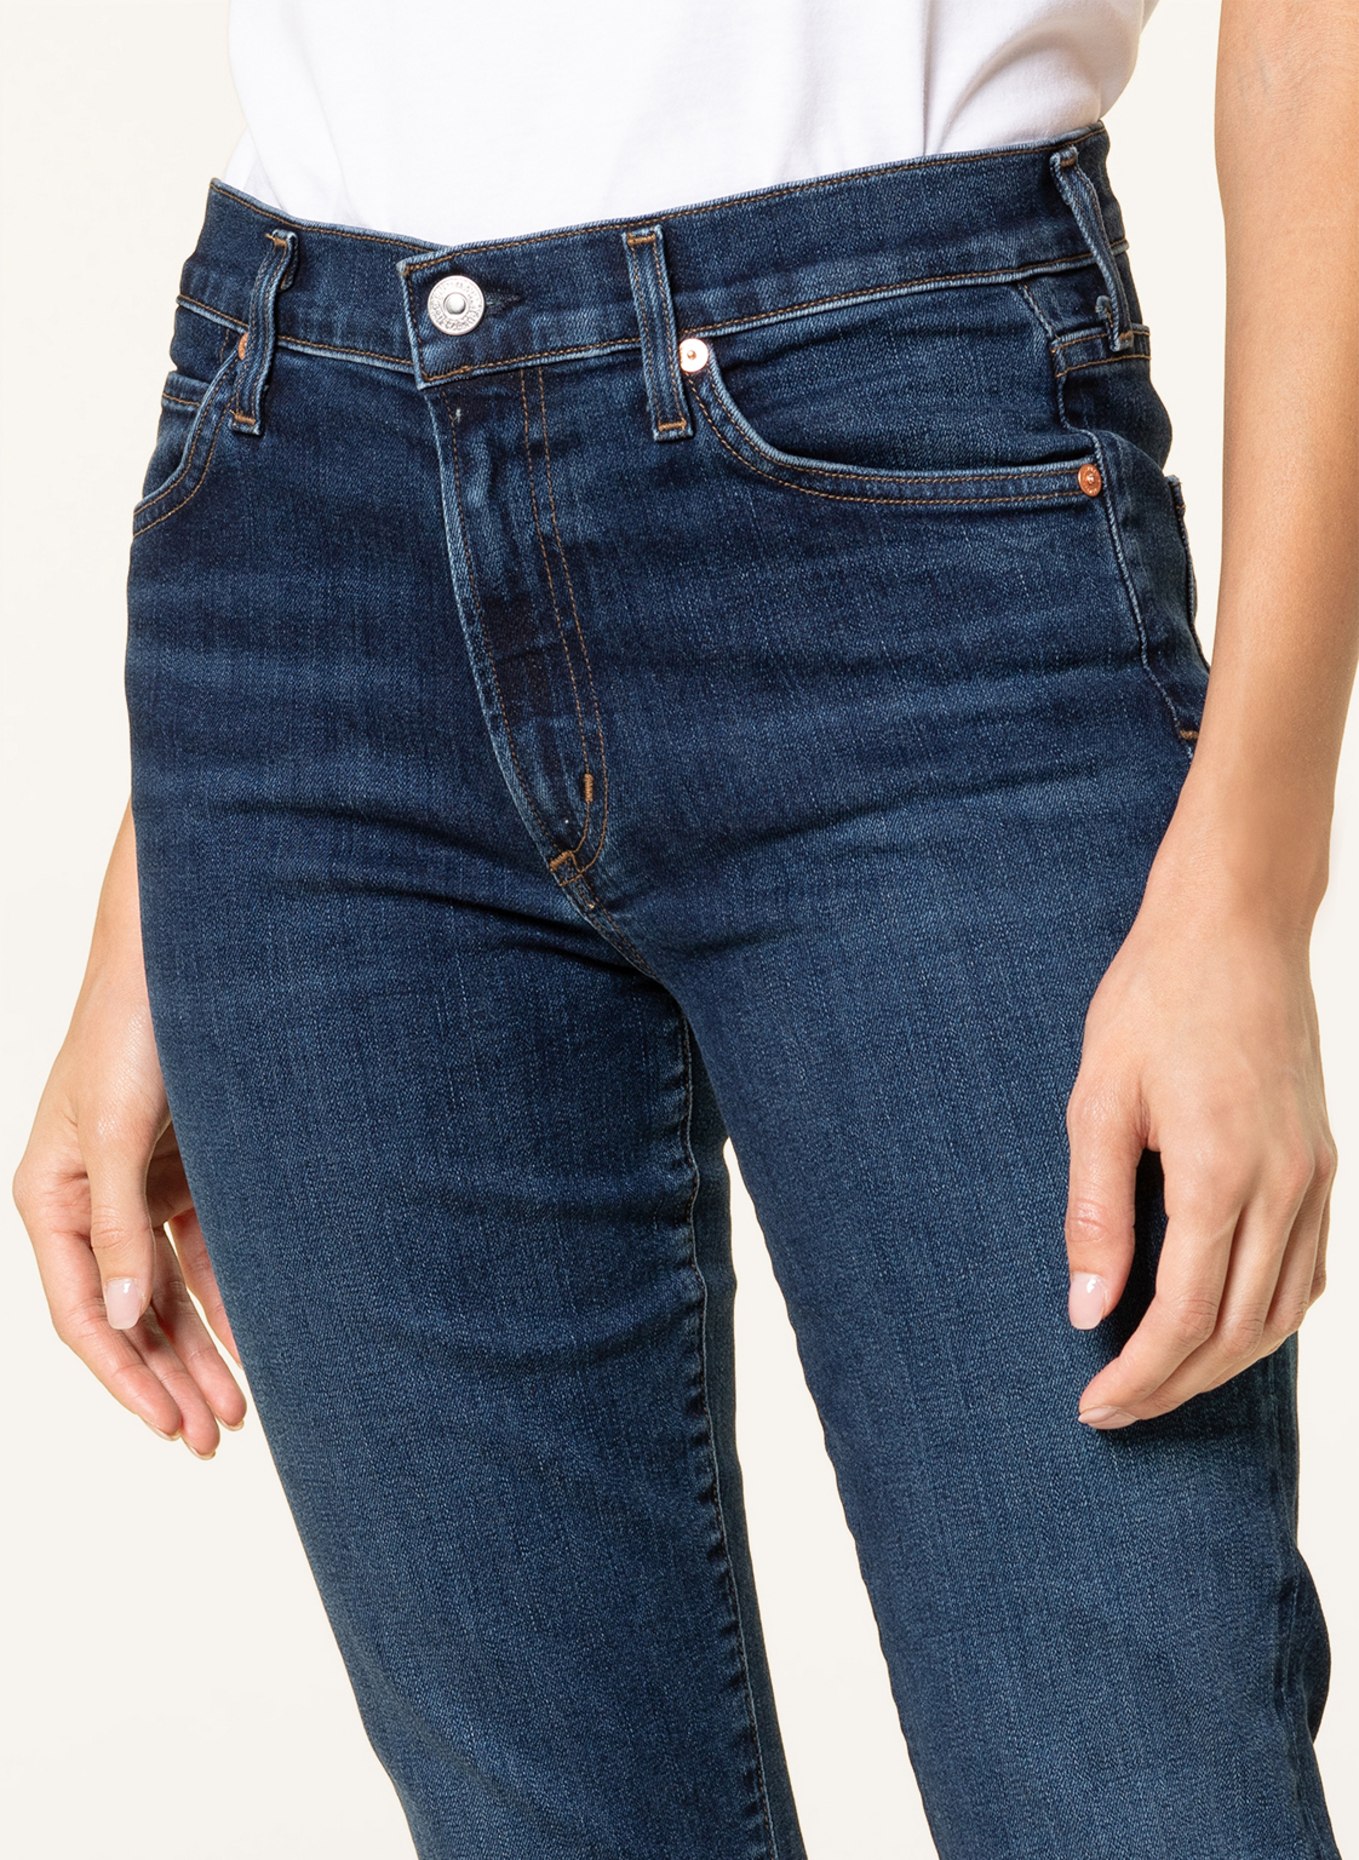 CITIZENS of HUMANITY Skinny jeans SKYLA , Color: Evermore dk indigo (Image 5)